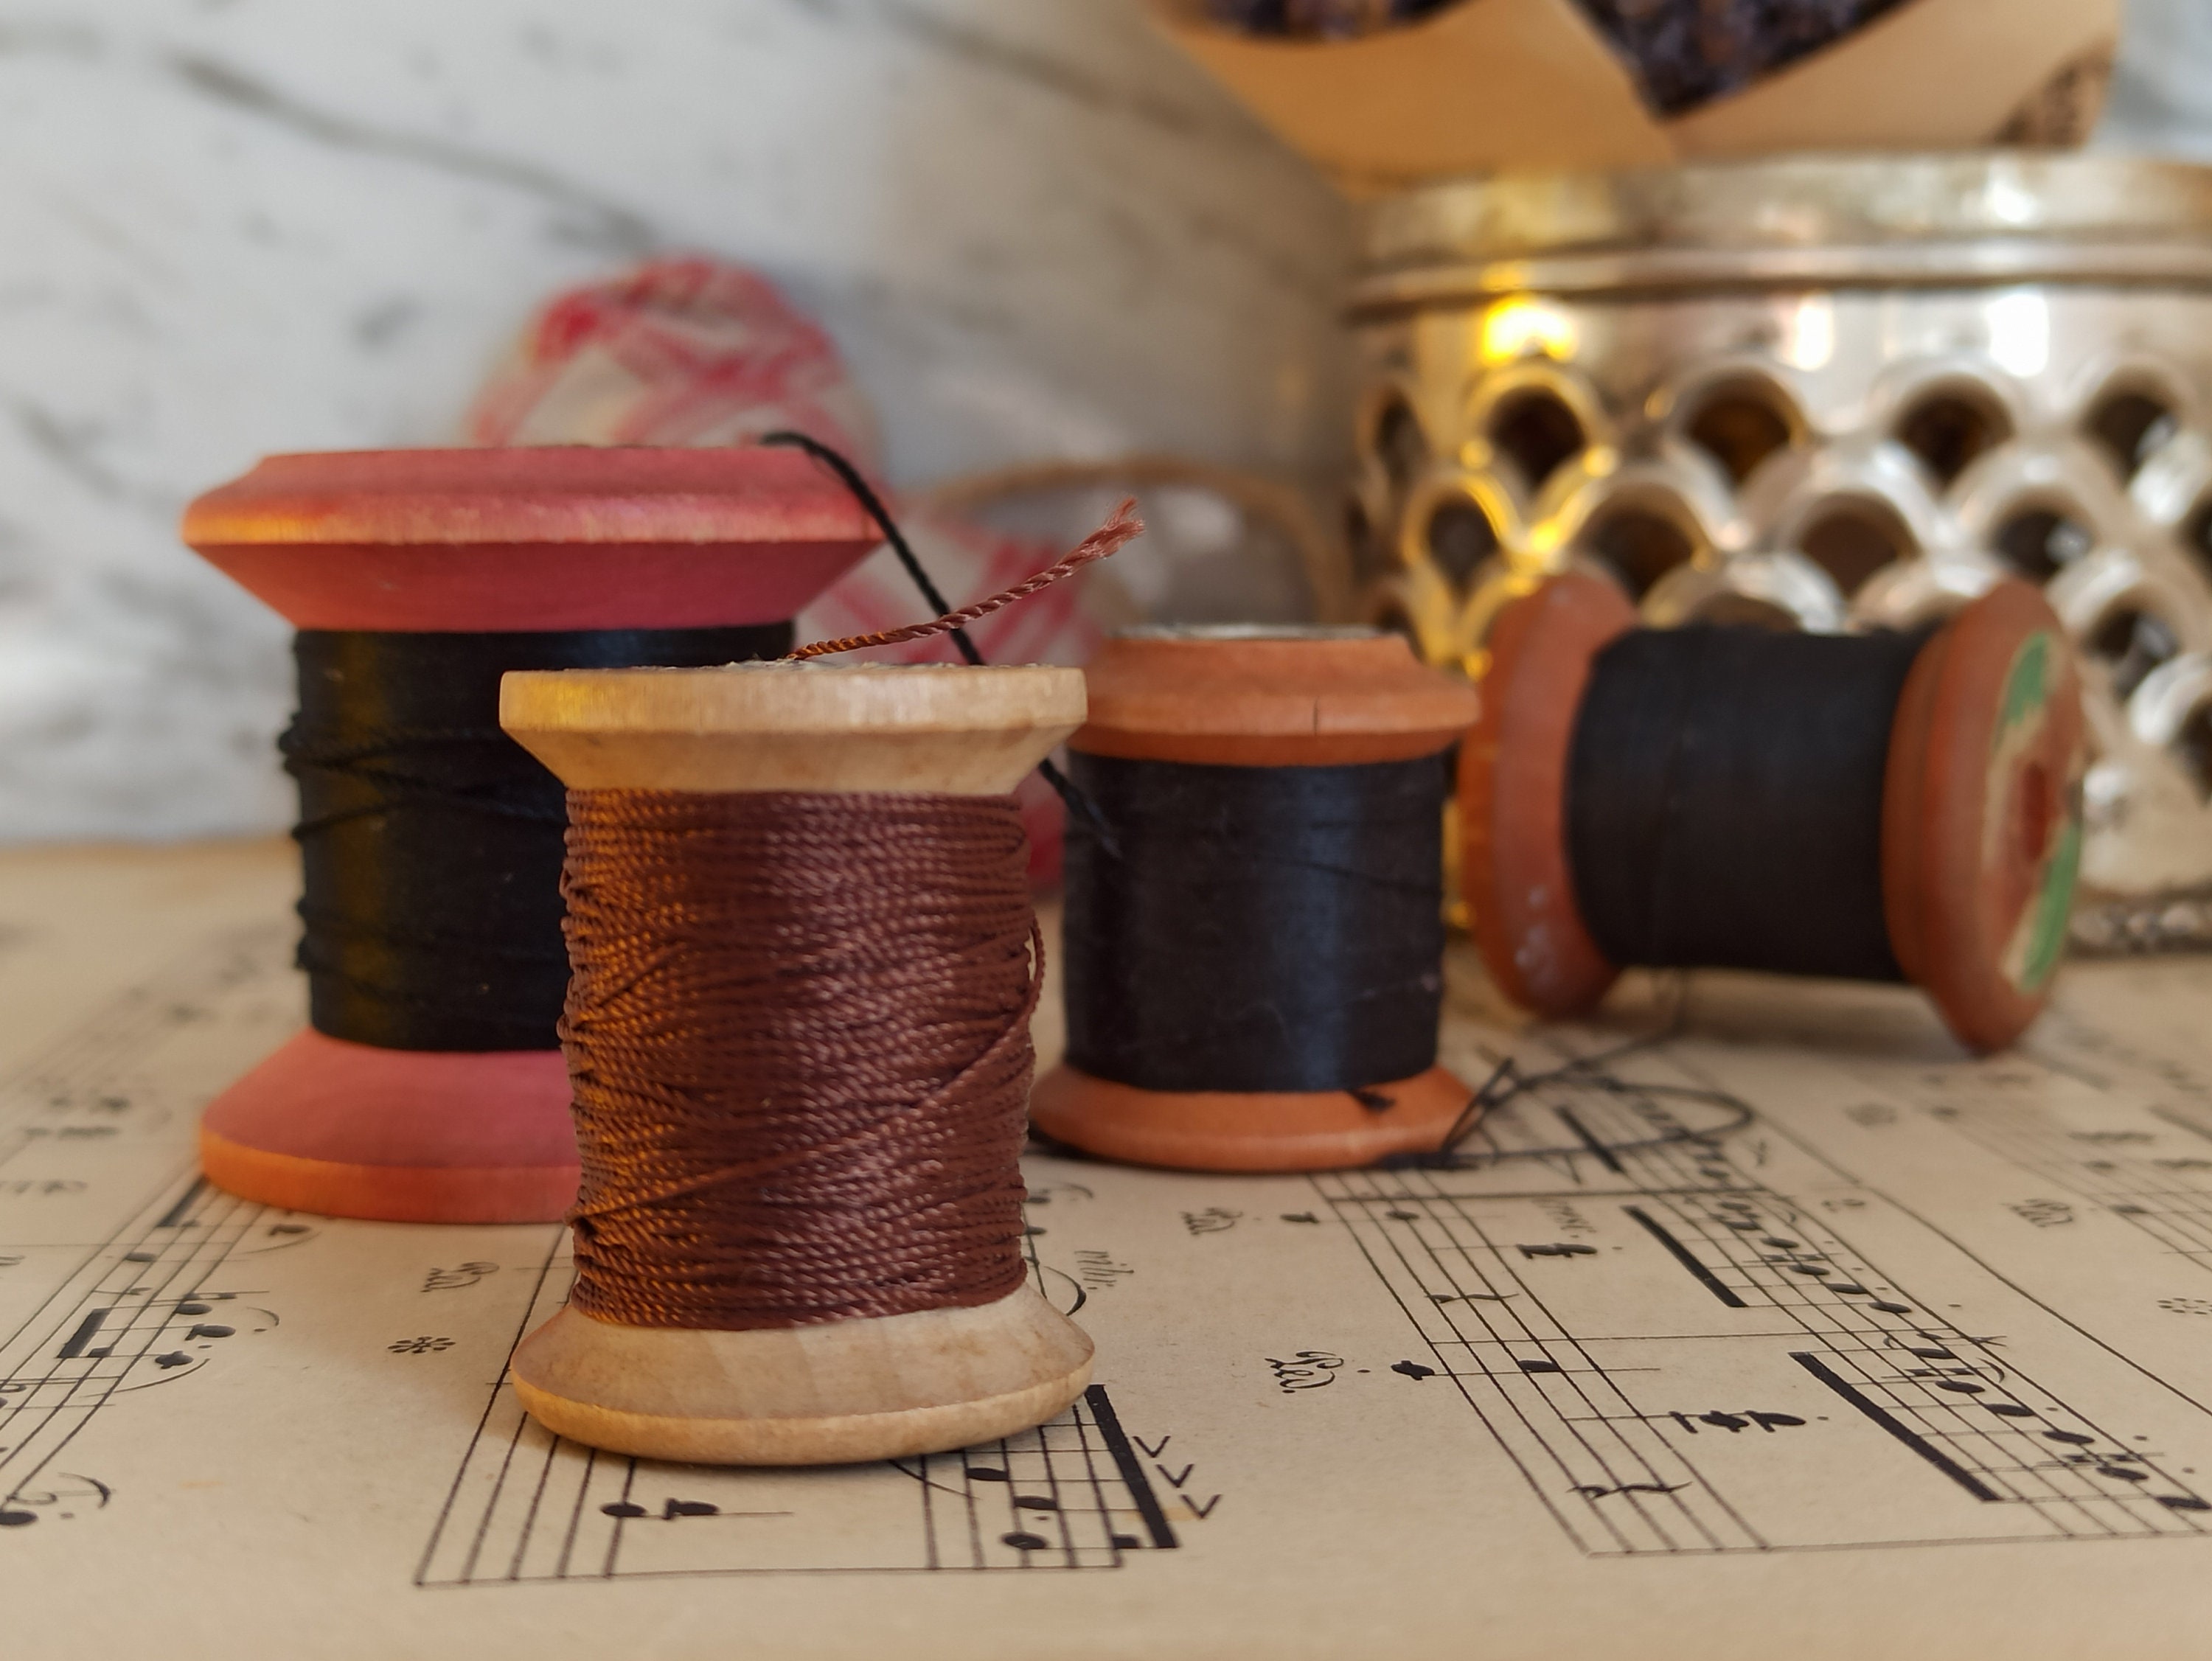 4 Wooden Spools Ancient, Black Thread on a Wooden Spool Sewing Kit Sewing  Thread Handwork 